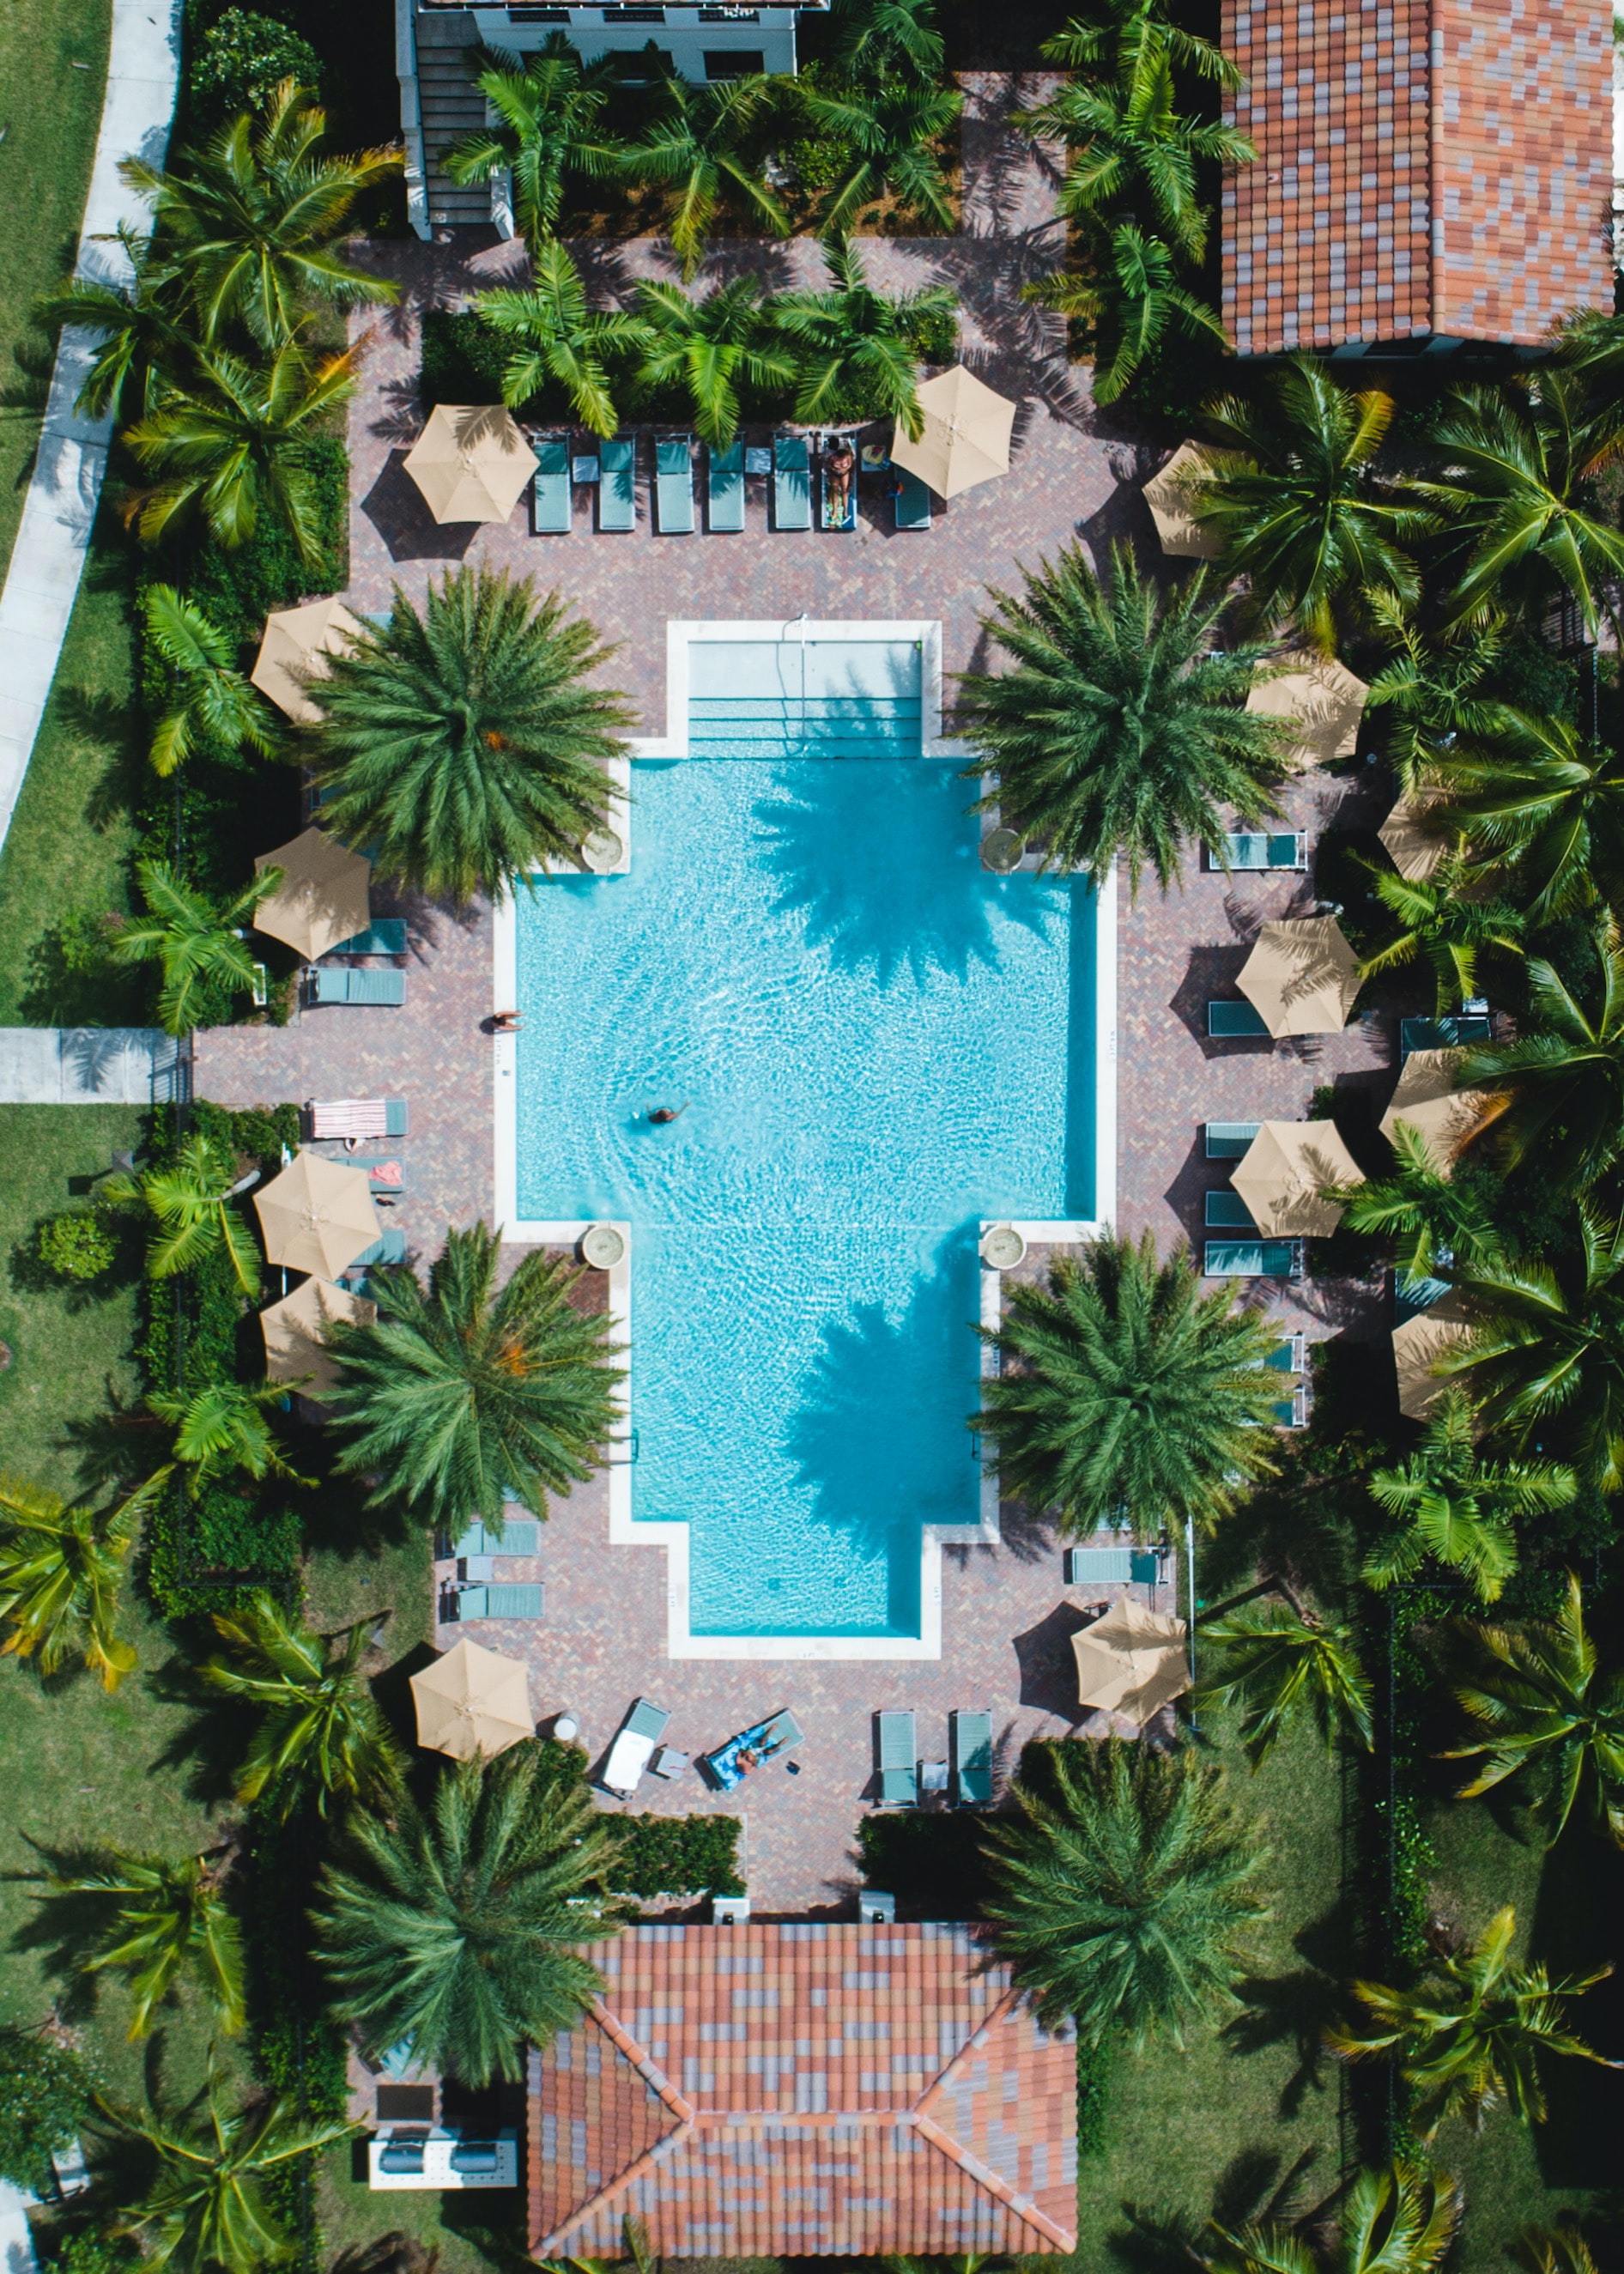 view from above, palms, pool, miscellanea, miscellaneous cellphone